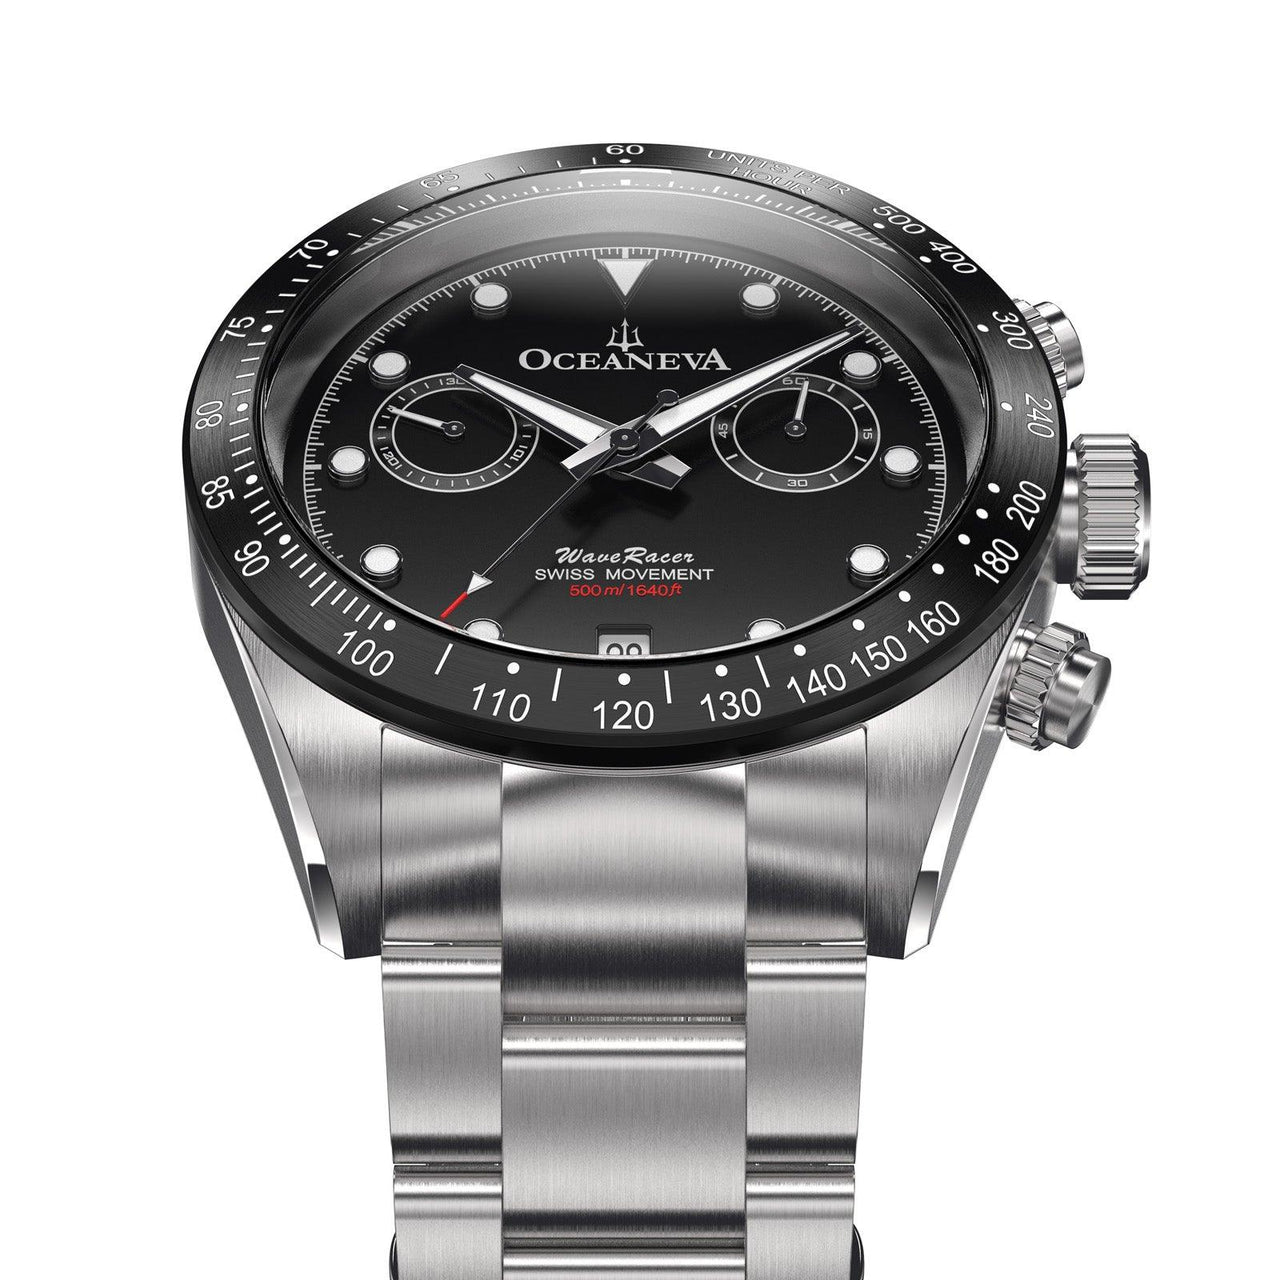 Oceaneva Black Dial Chronograph Watch Frontal View Picture